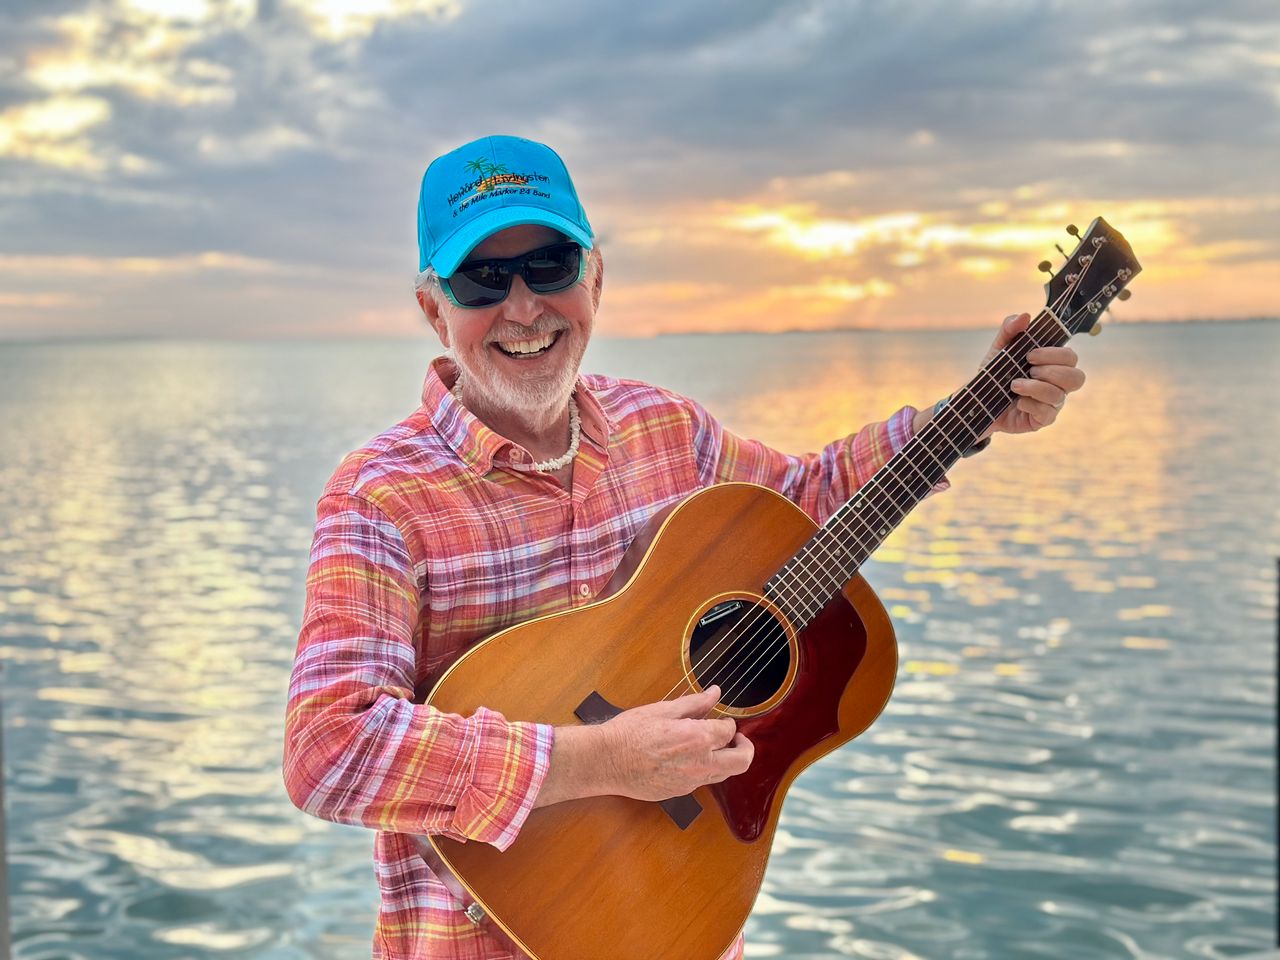 Howard Livingston, pictured here at his home, has just released his 11th album, “House Down by the Sea.” Photo: Cyndy Livingston